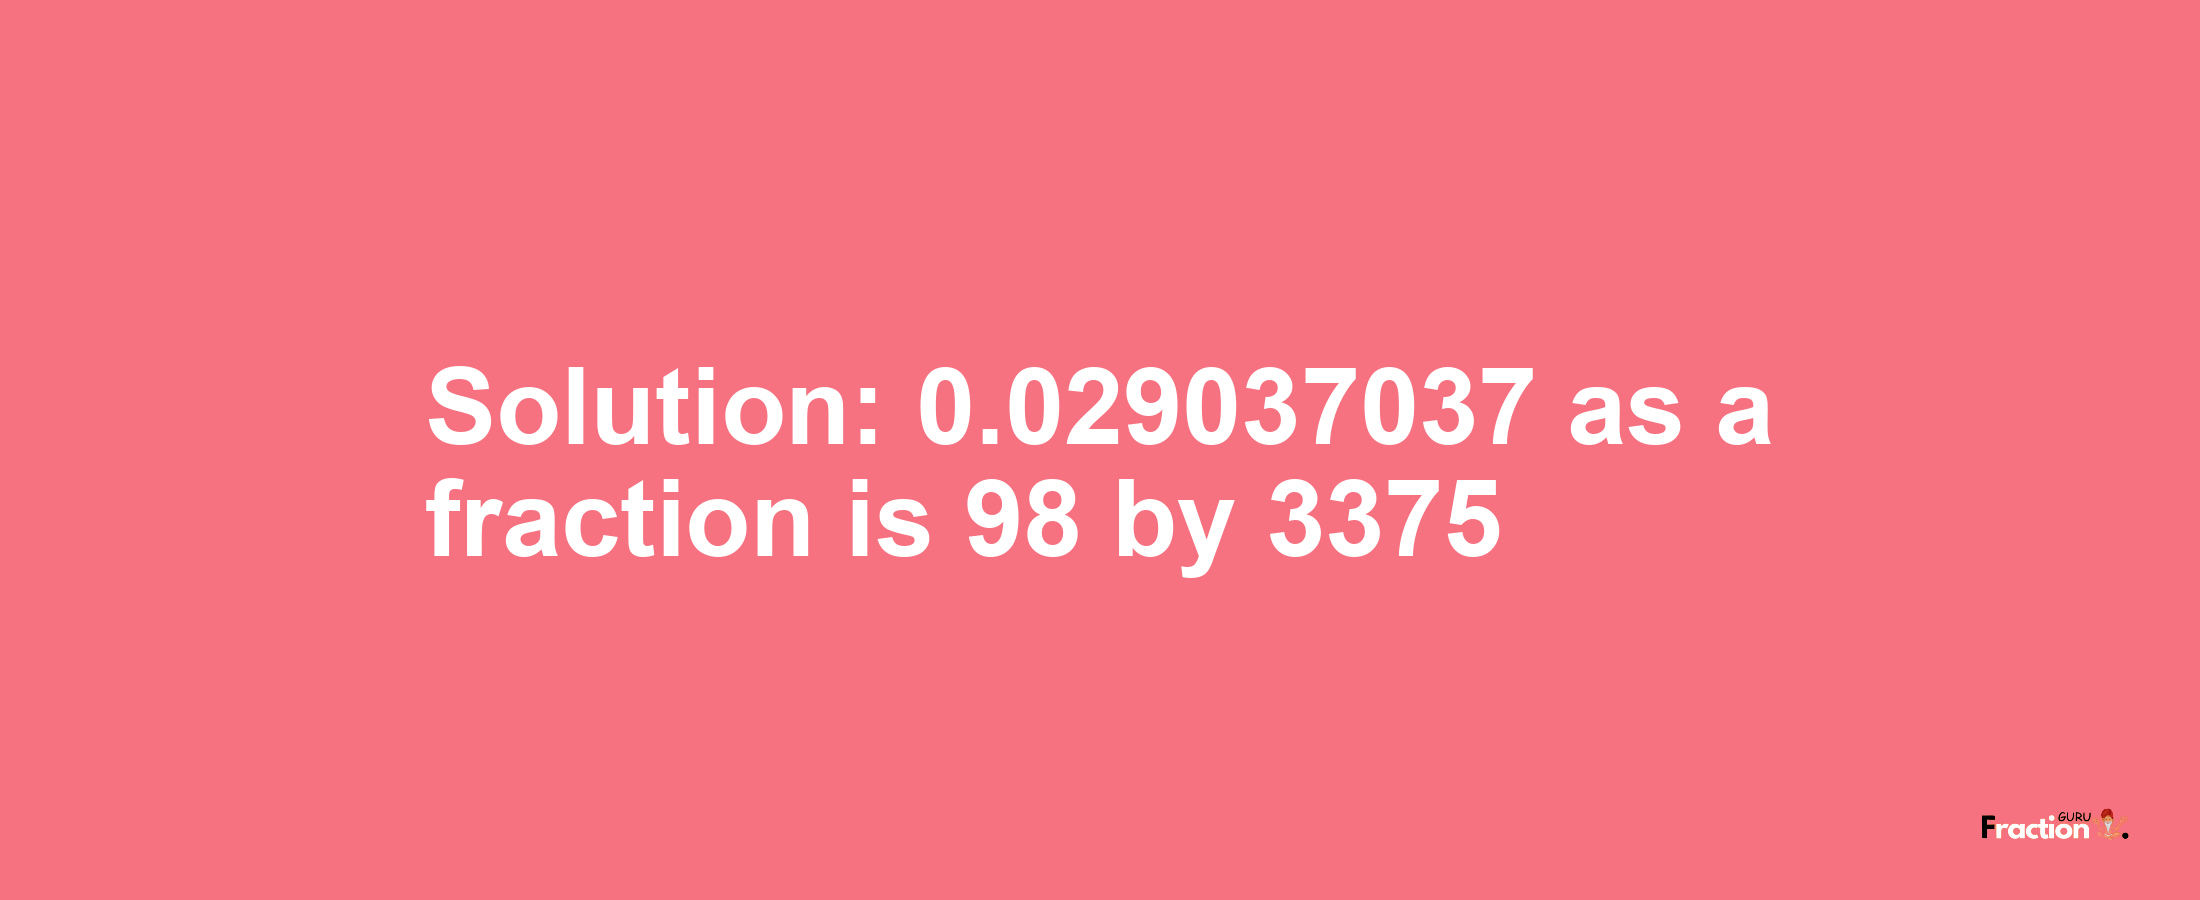 Solution:0.029037037 as a fraction is 98/3375